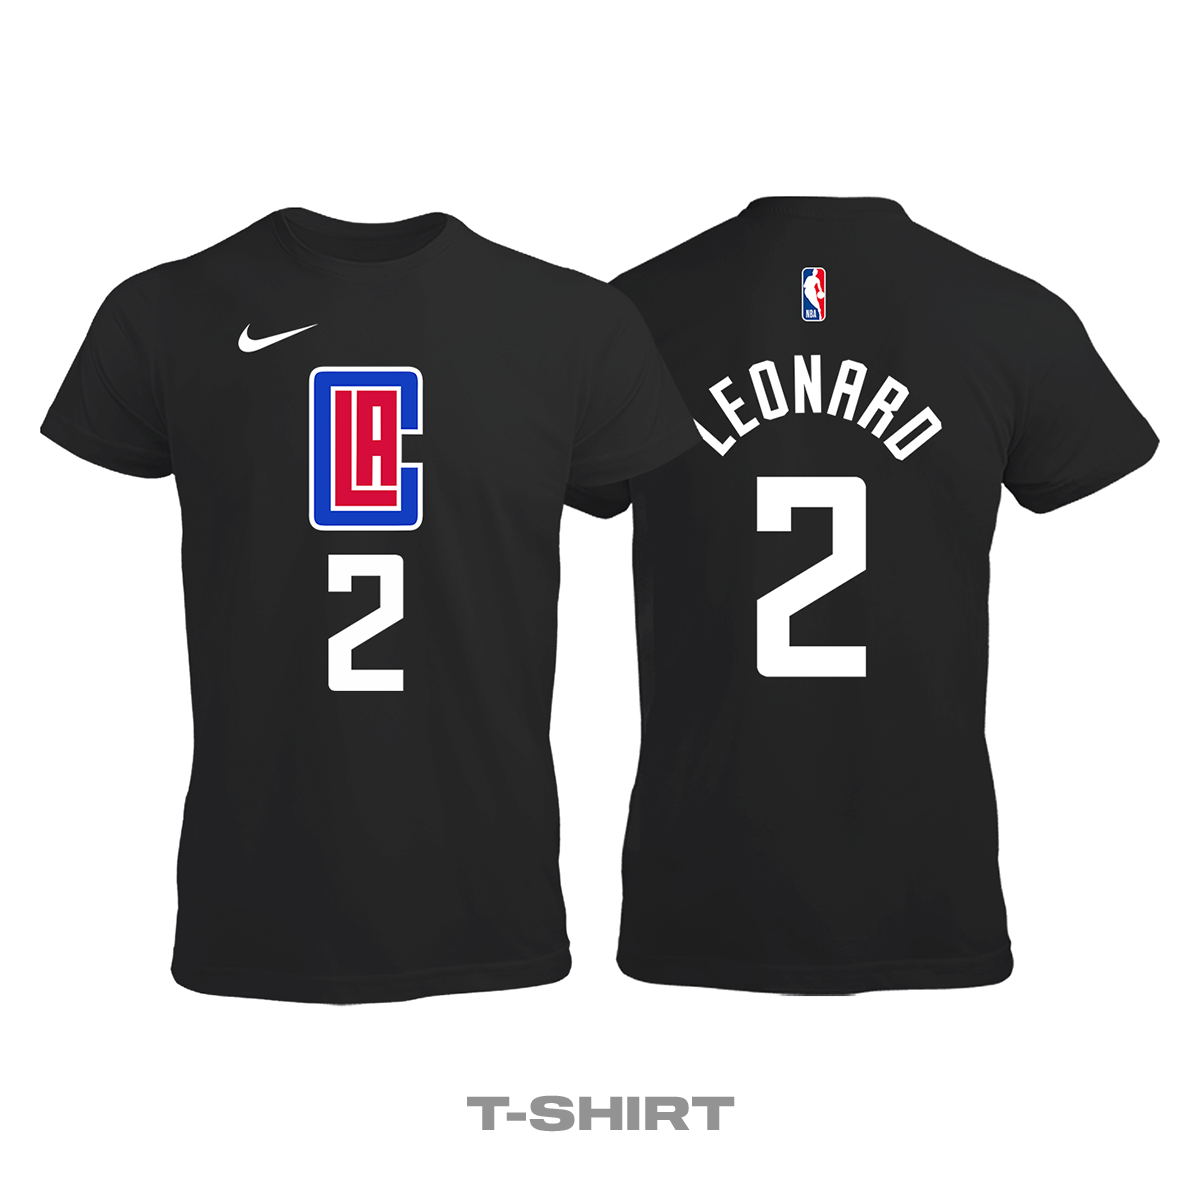 Los Angeles Clippers: Statement Edition 2017/2018 Tişört